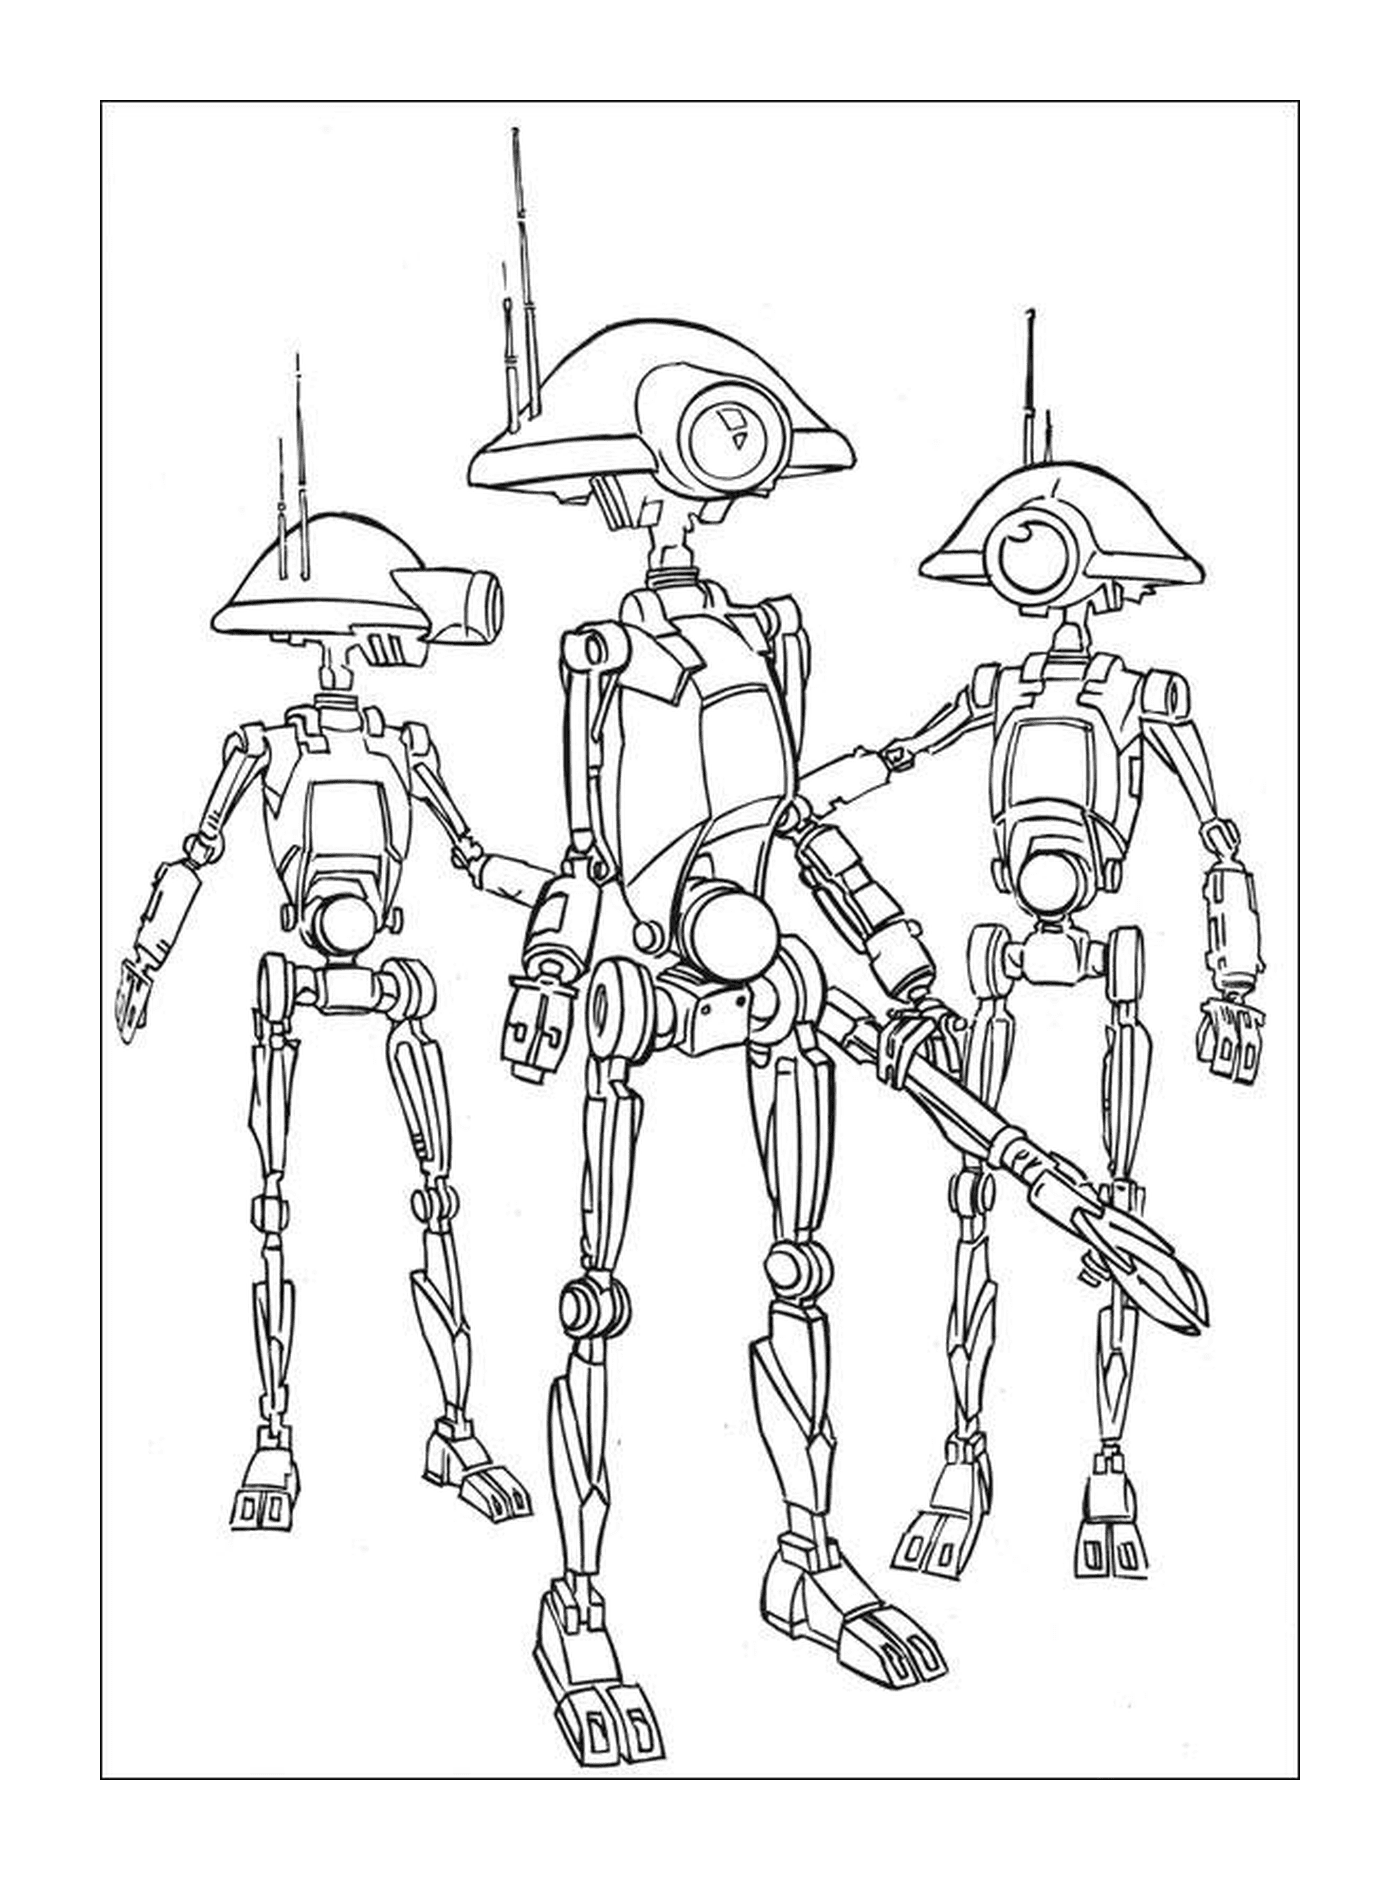  Three droids lined up 